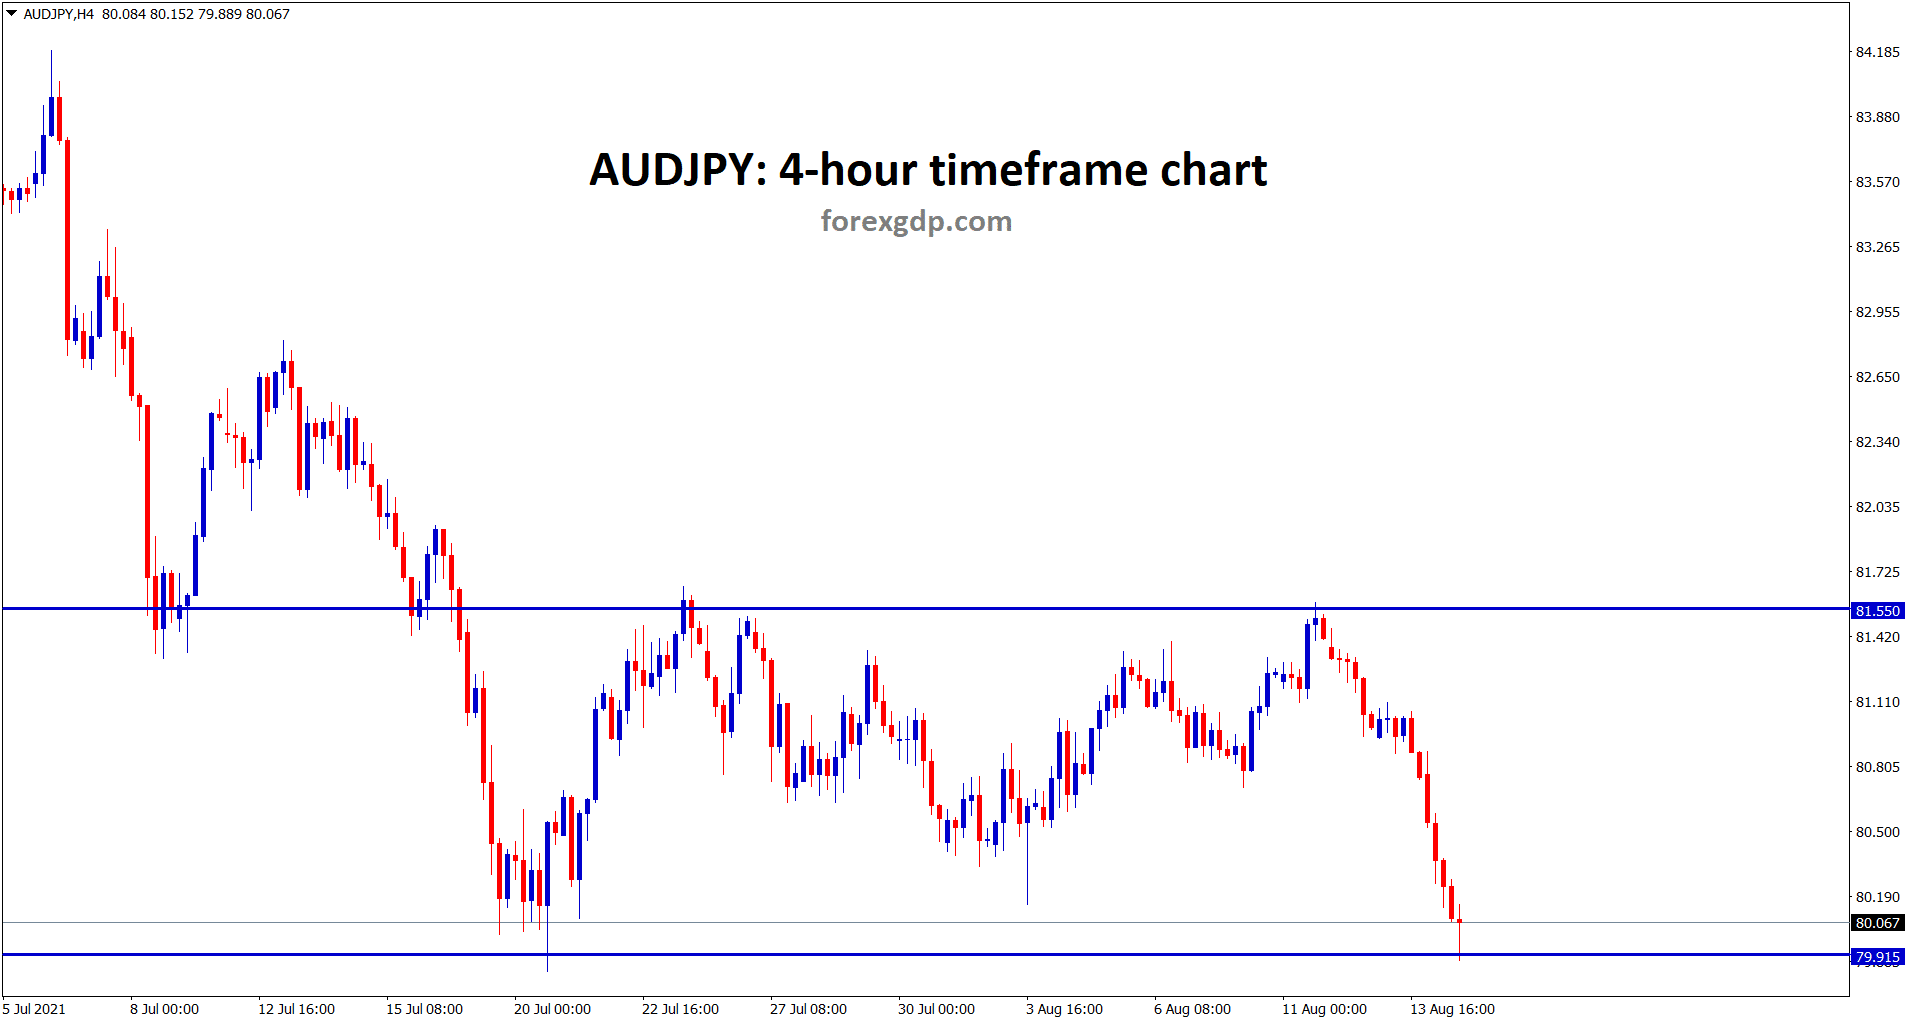 AUDJPY hits the support level now